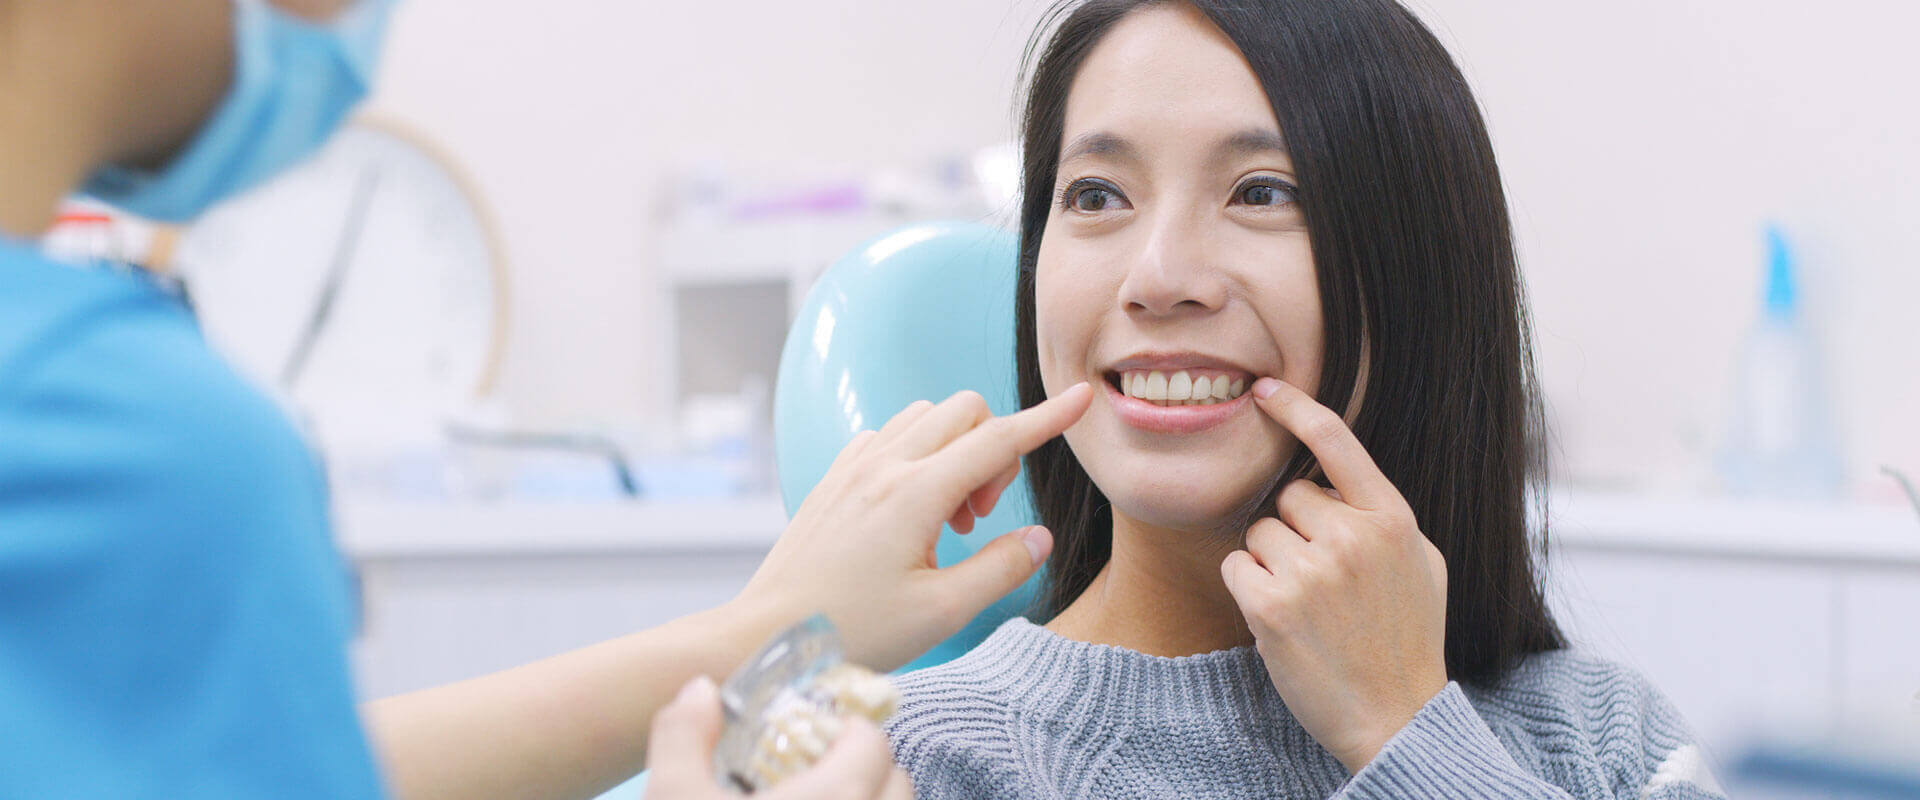 Smiling young woman pointing her finger at dental implants